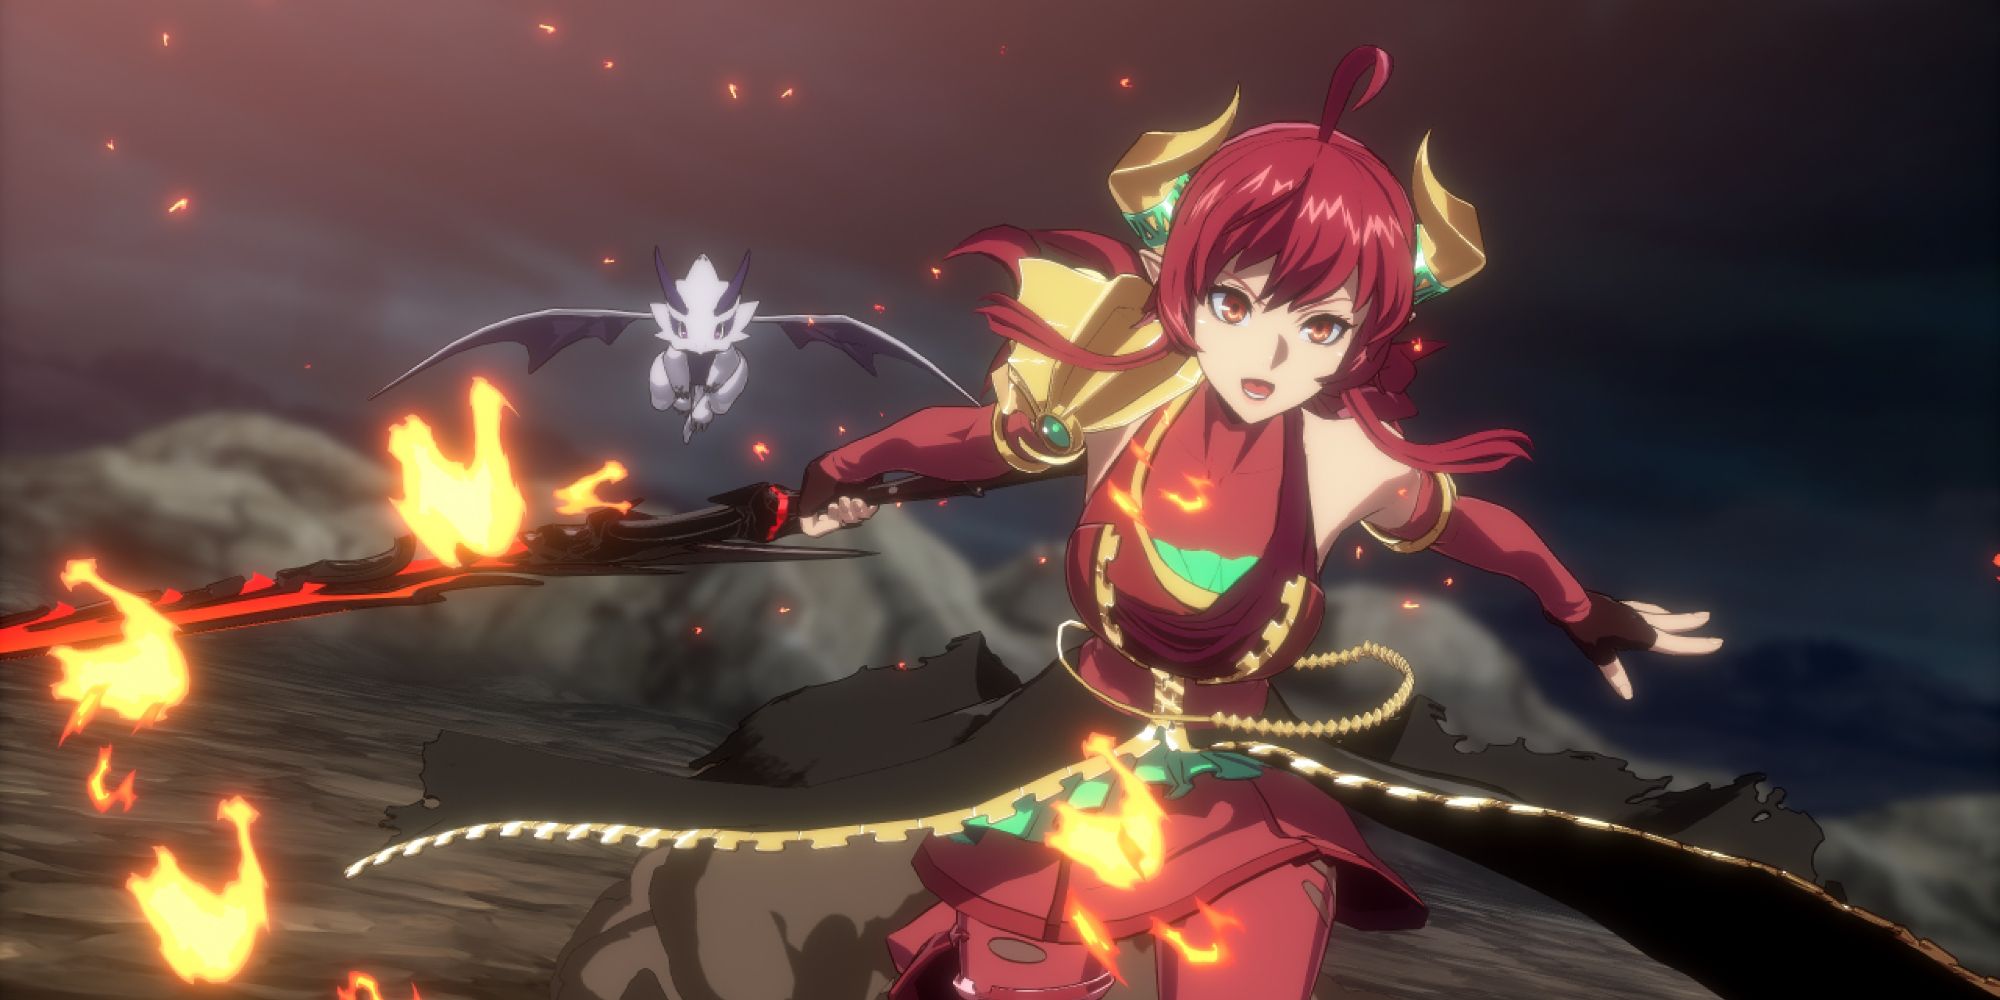 Dragon Knight modded to look like Pyra in DNF Duel